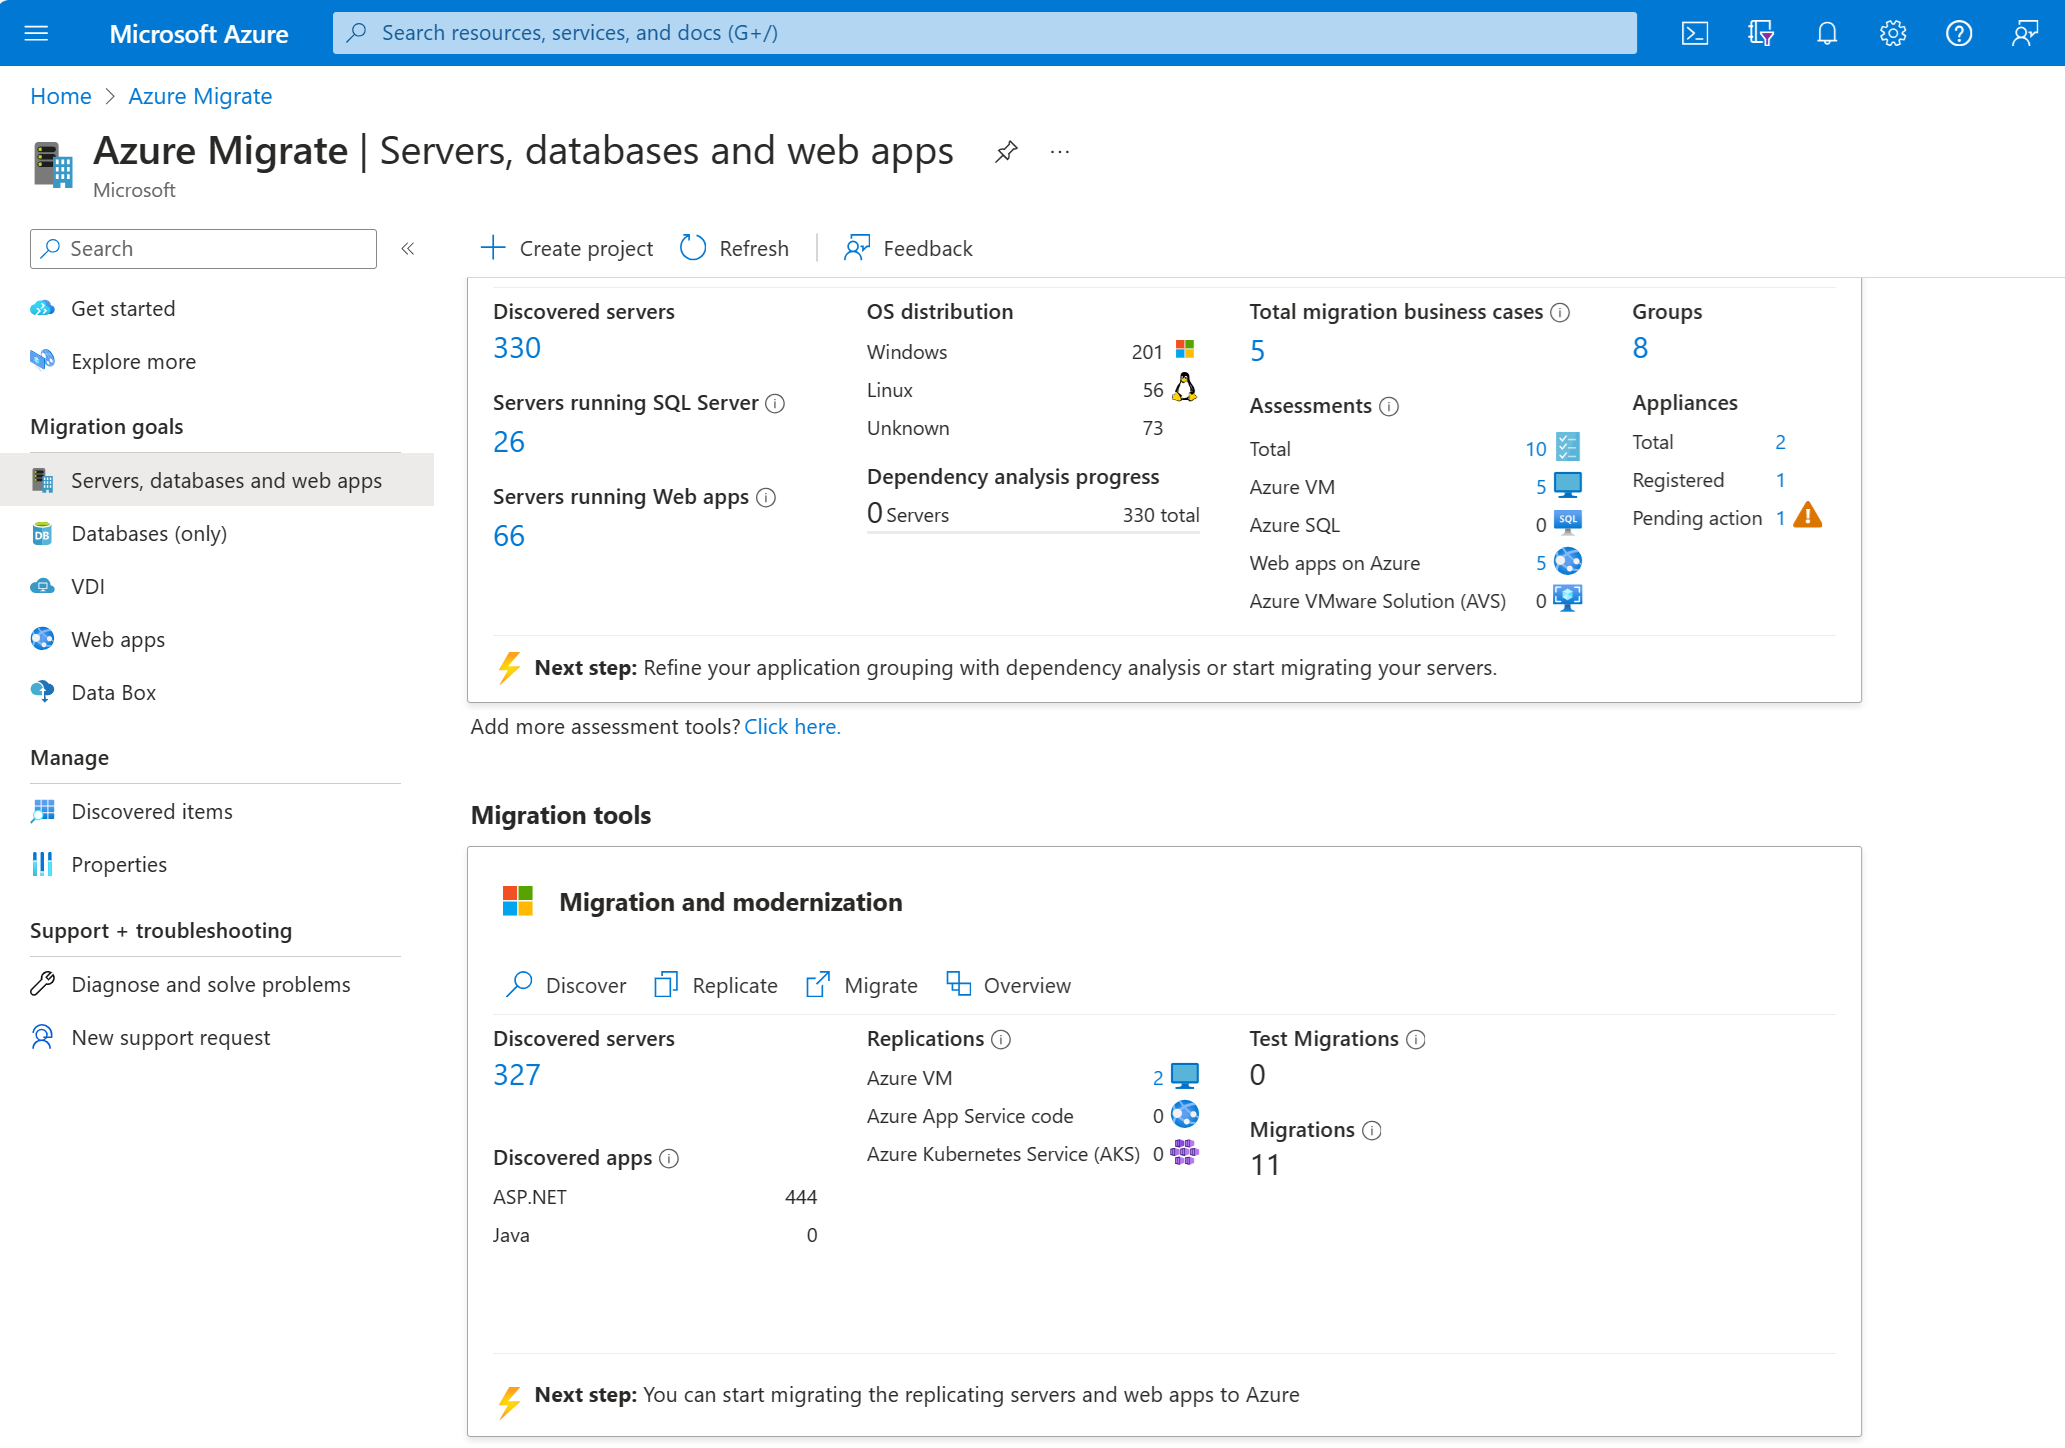 Screenshot of the Azure Migrate servers, databases and web apps page in the Azure portal.